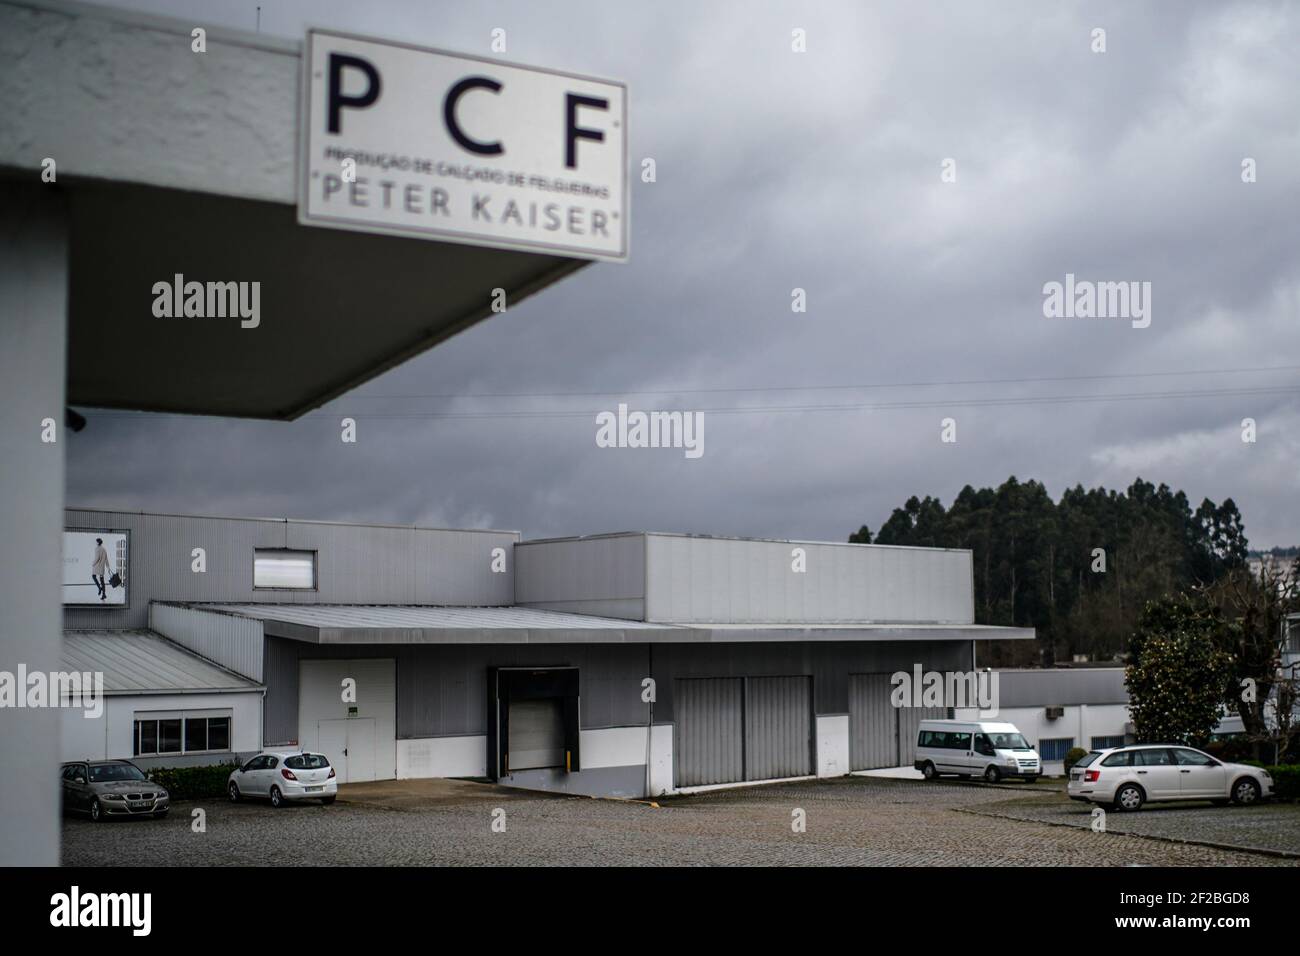 Felgueiras, 03/11/2021 - Peter Kaiser's PCF comp wy, which opened insolvency,  dismissing more than 400 workers (Gonçalo Delgado / Global Images/Sipa USA  Stock Photo - Alamy